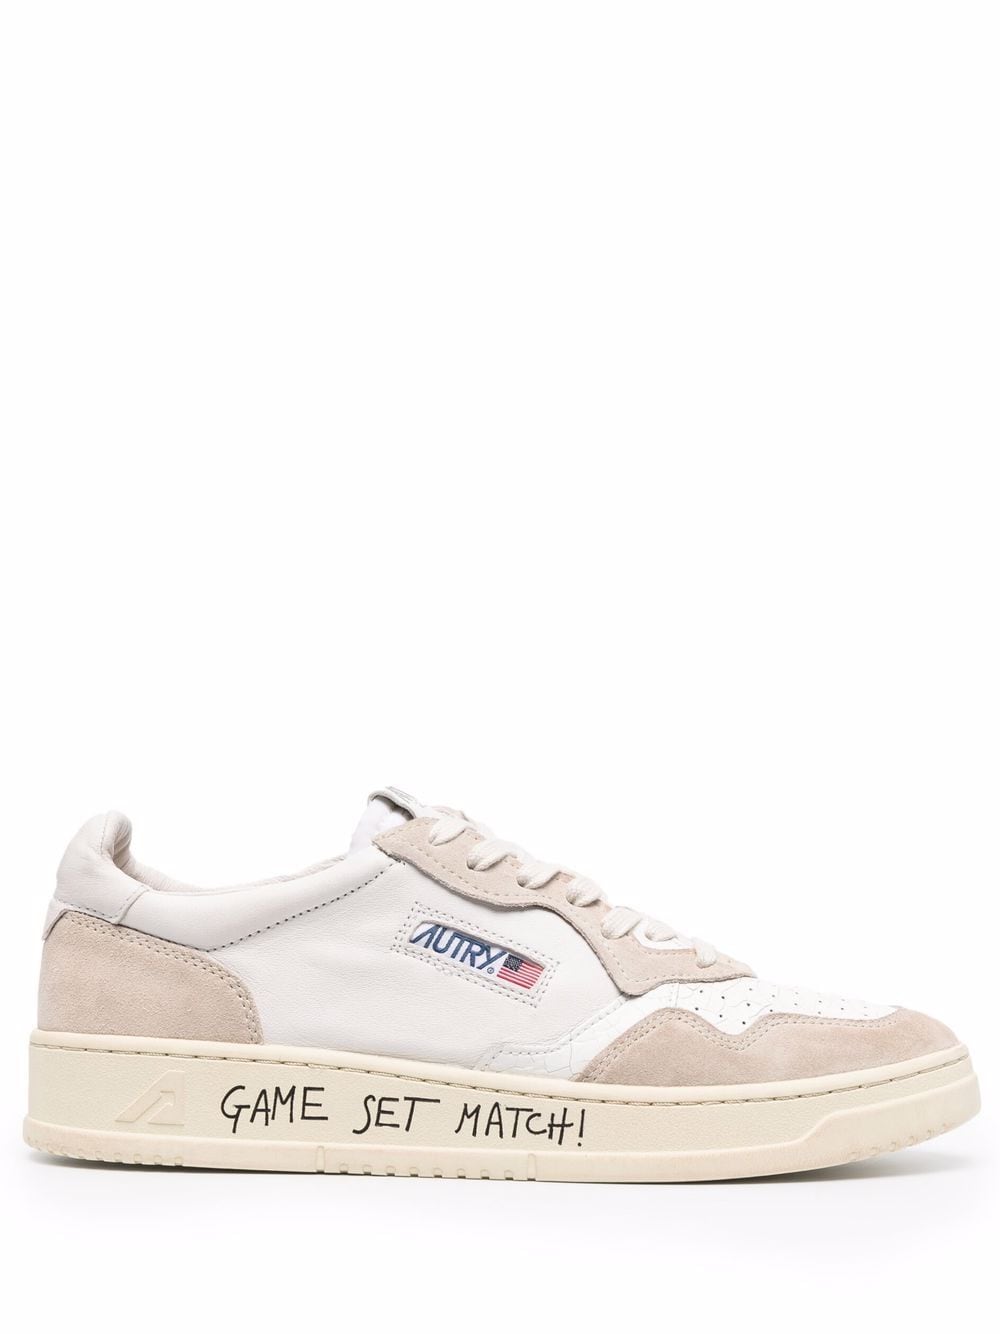 Sneakers Game Set Match!<BR/>